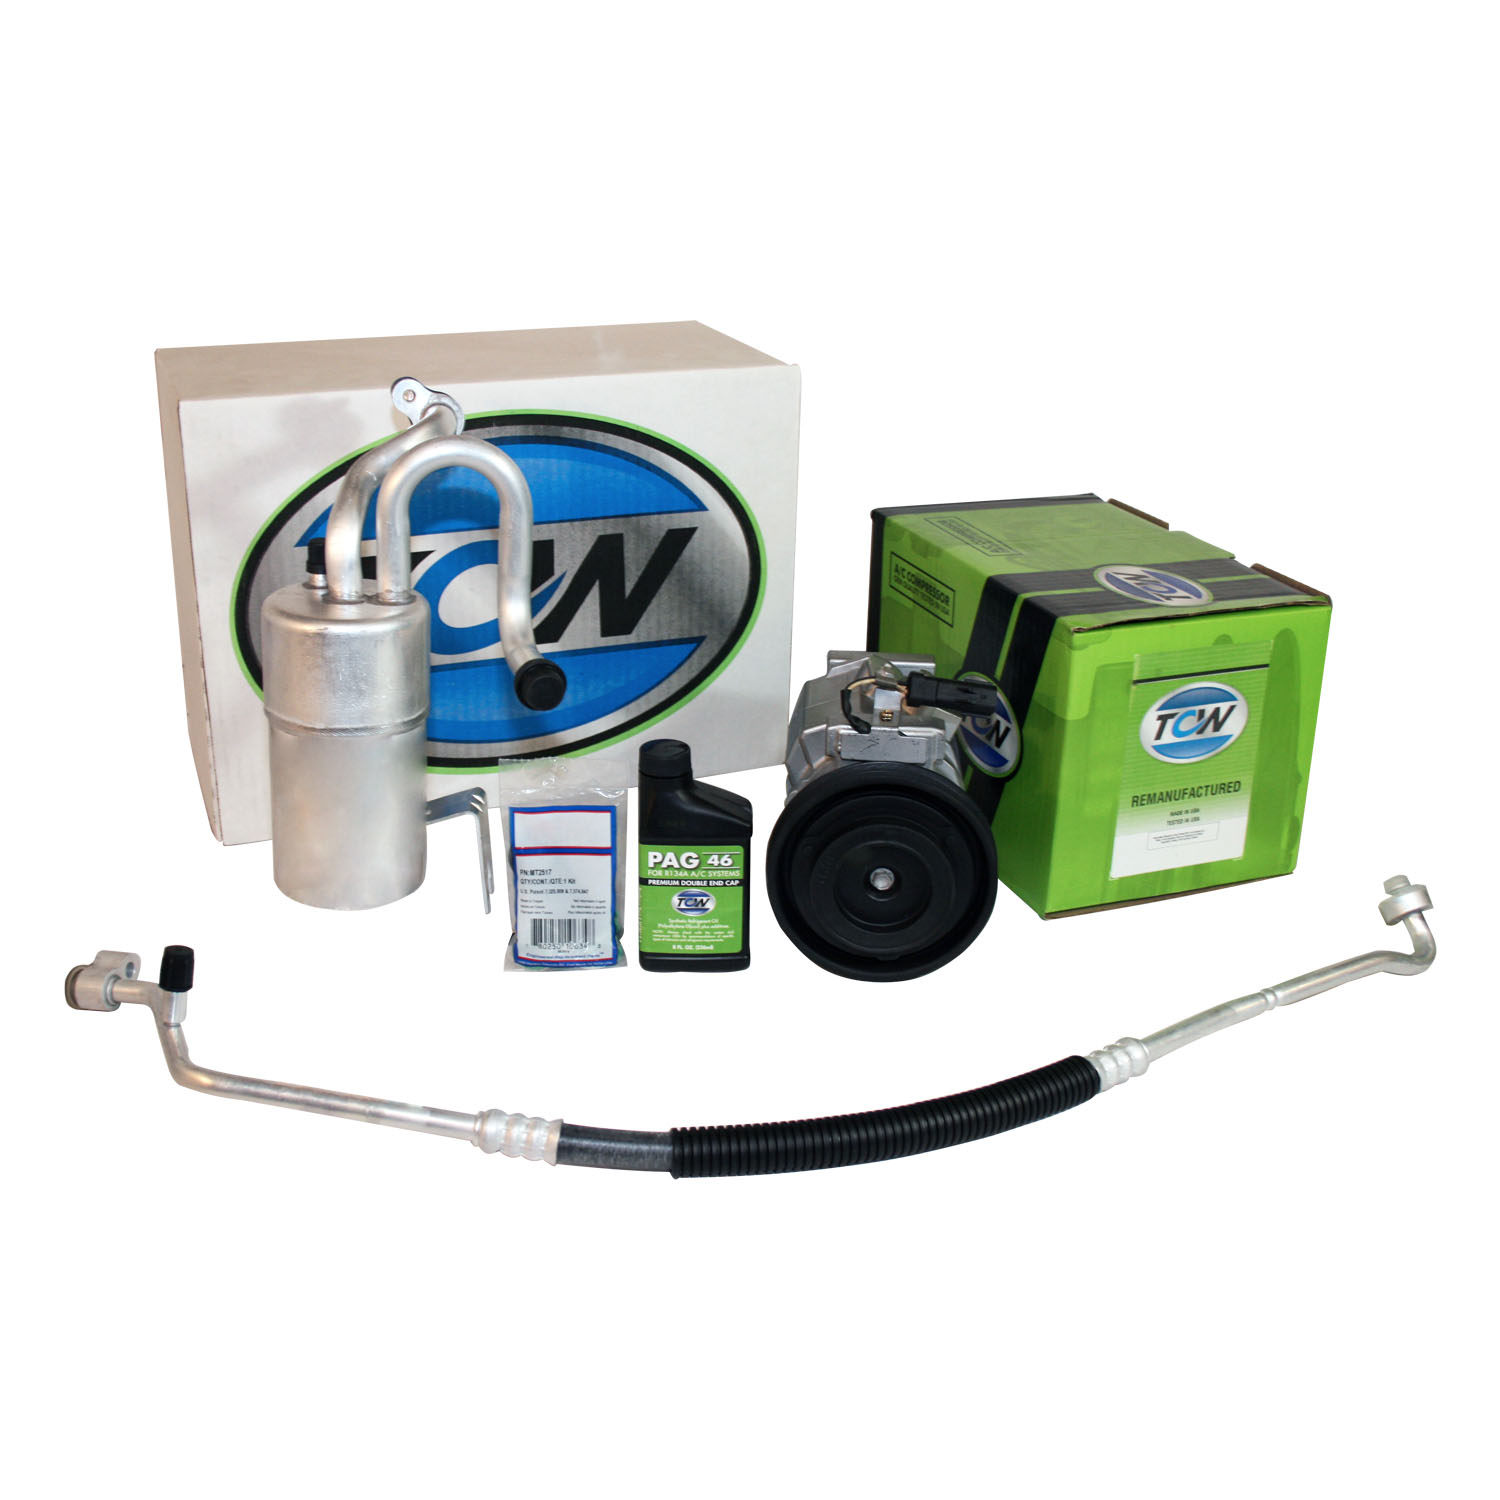 TCW Vehicle A/C Kit K1000318R Remanufactured